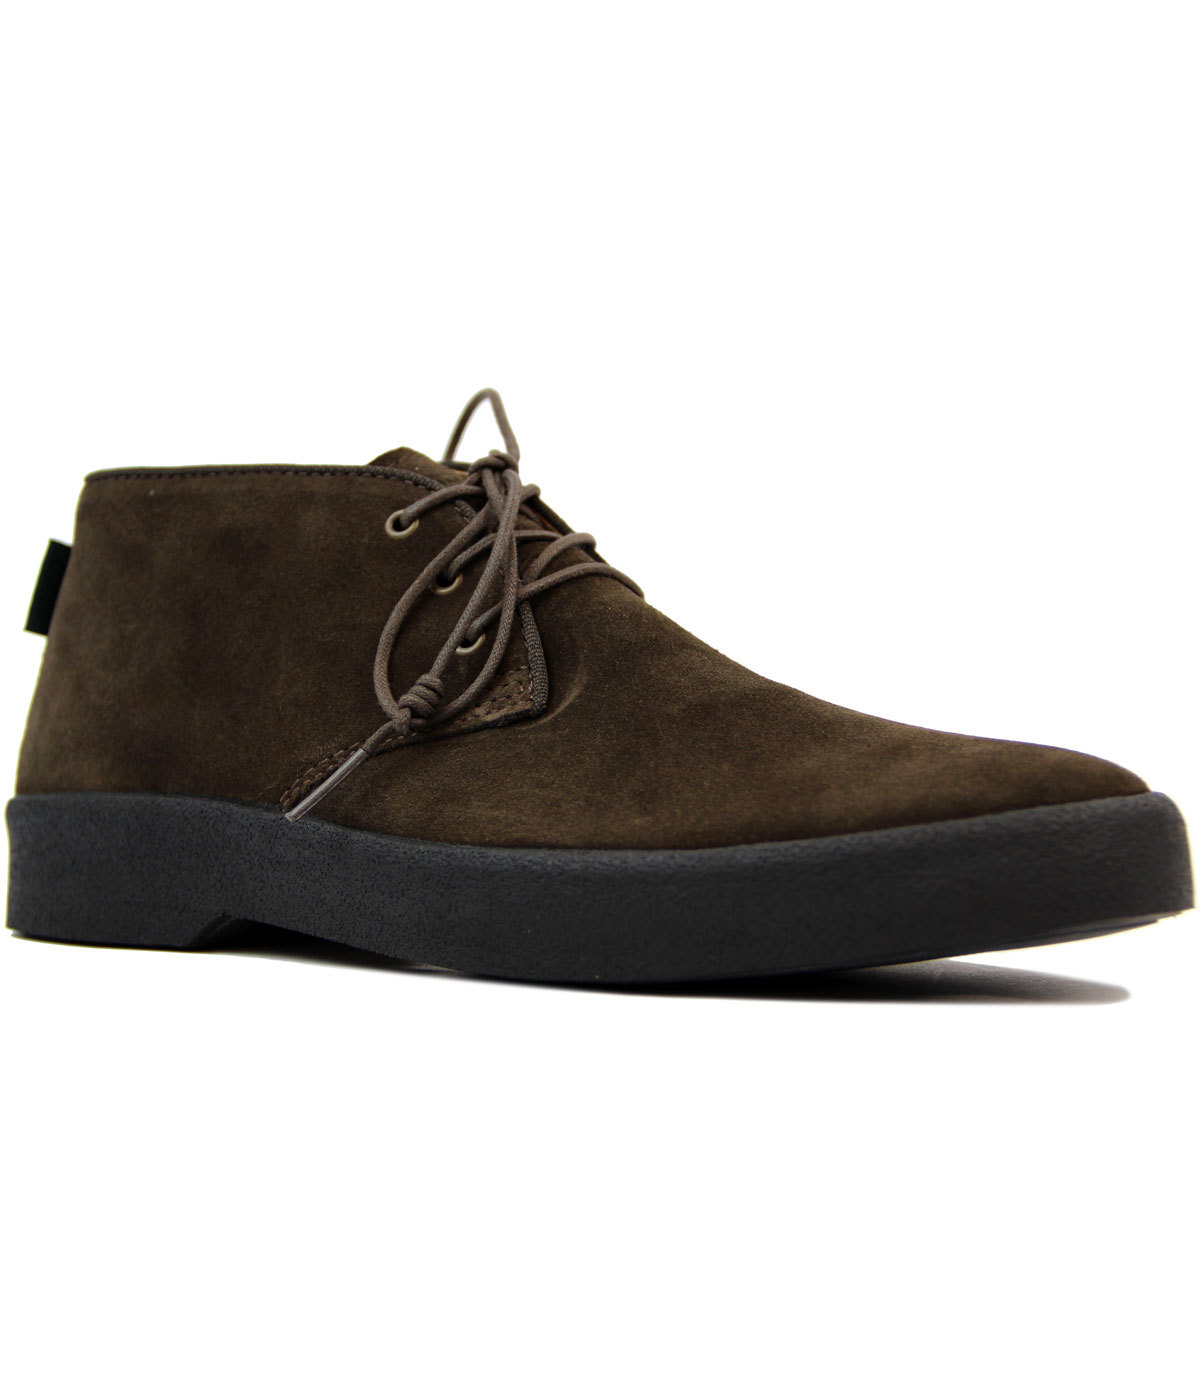 BASS WEEJUNS Scholar Stanford Retro Mod Mid Suede Playboy Boots